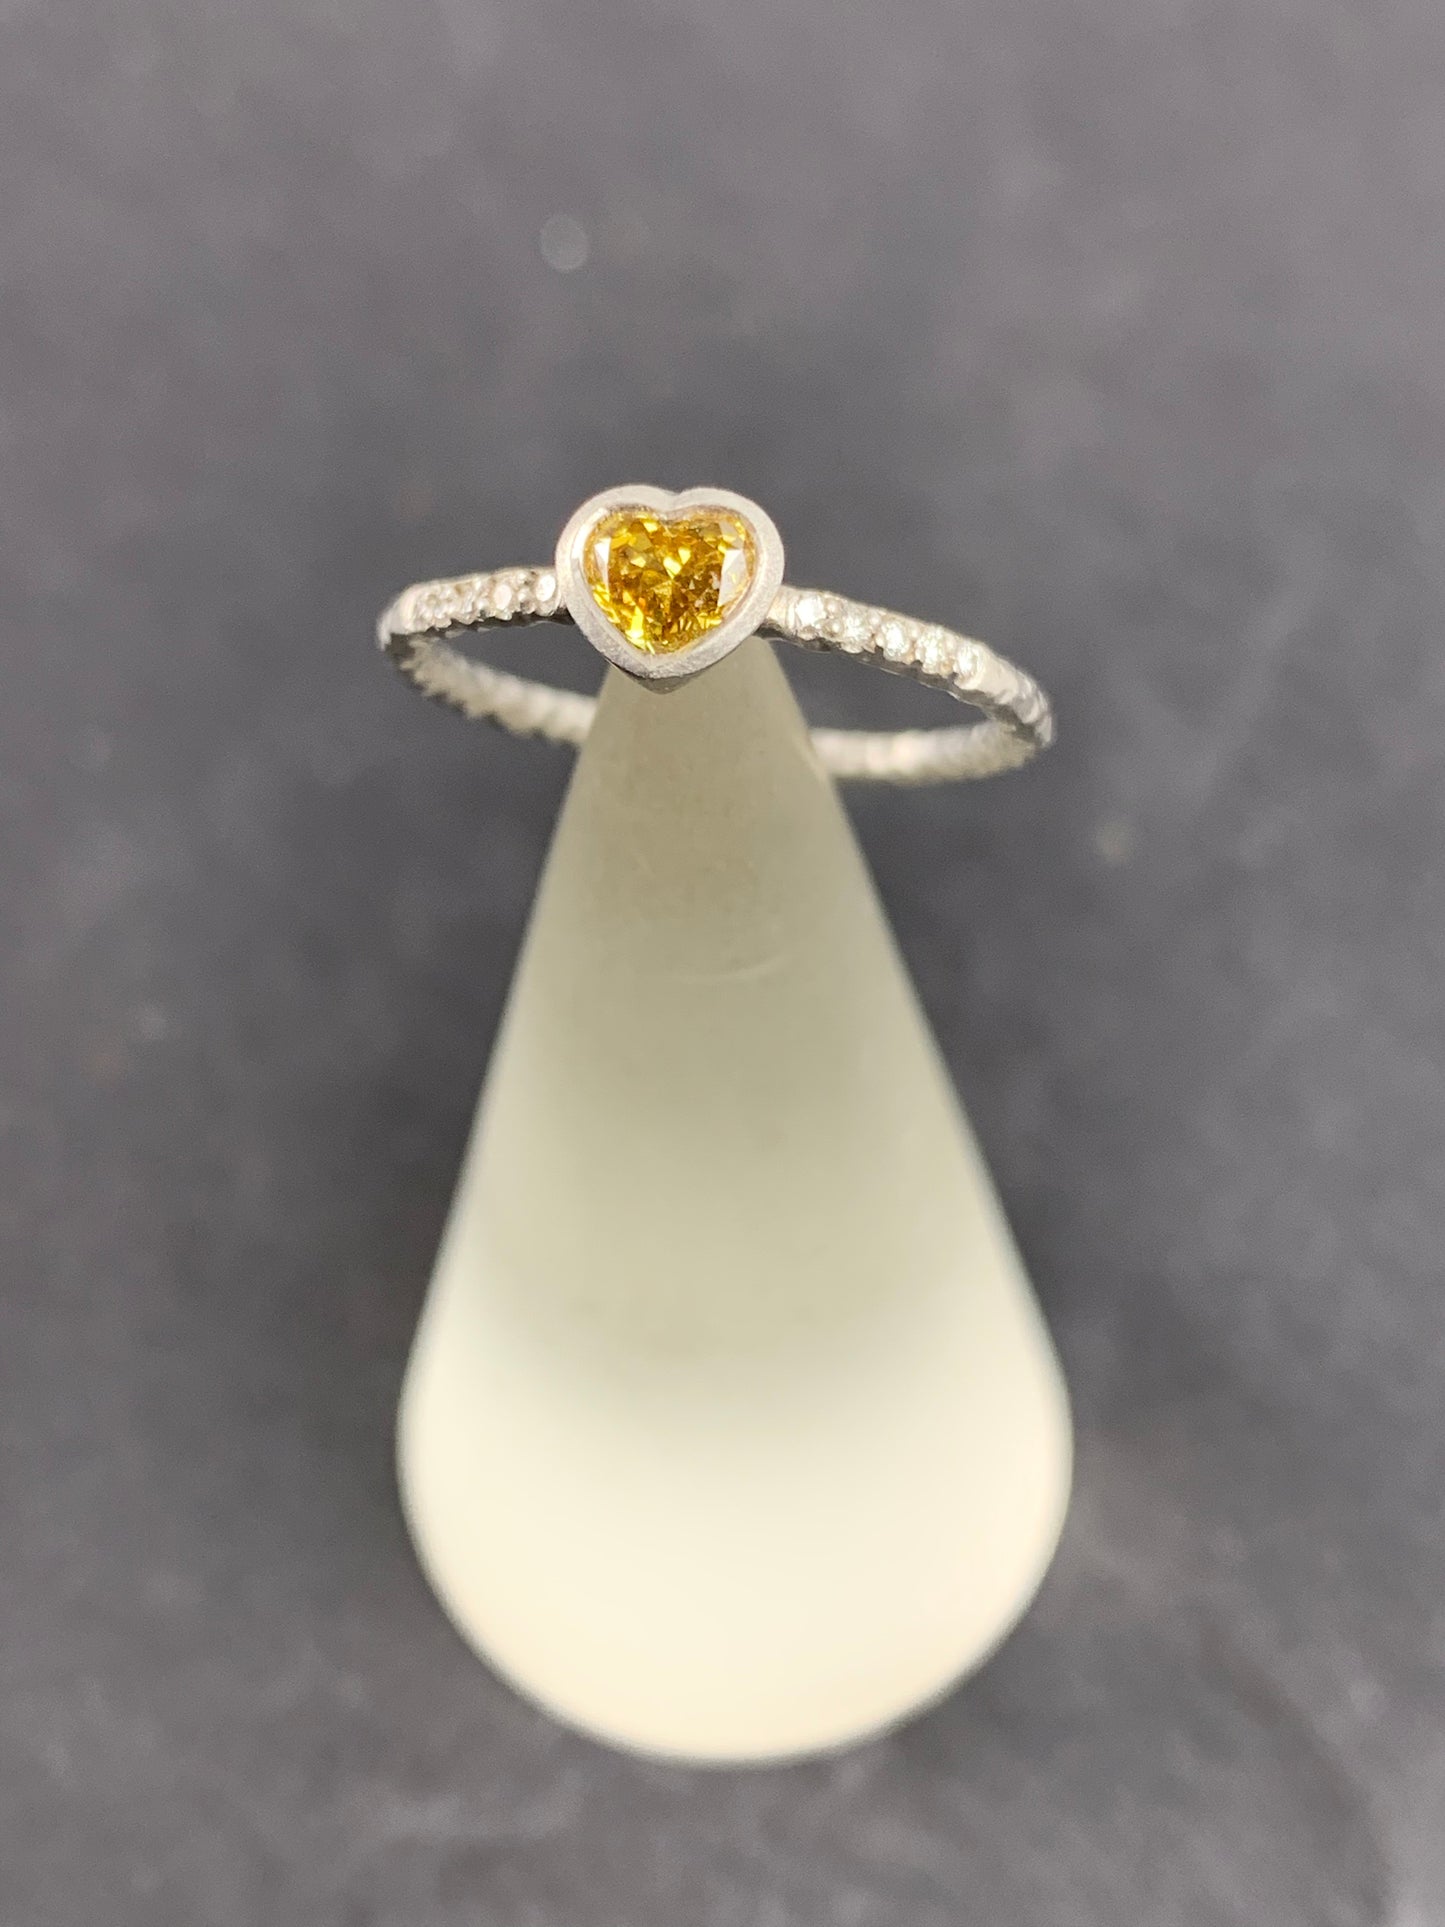 Betts, Malcolm - Platinum Ring with Yellow Heart Shaped Diamond, Size K1/2